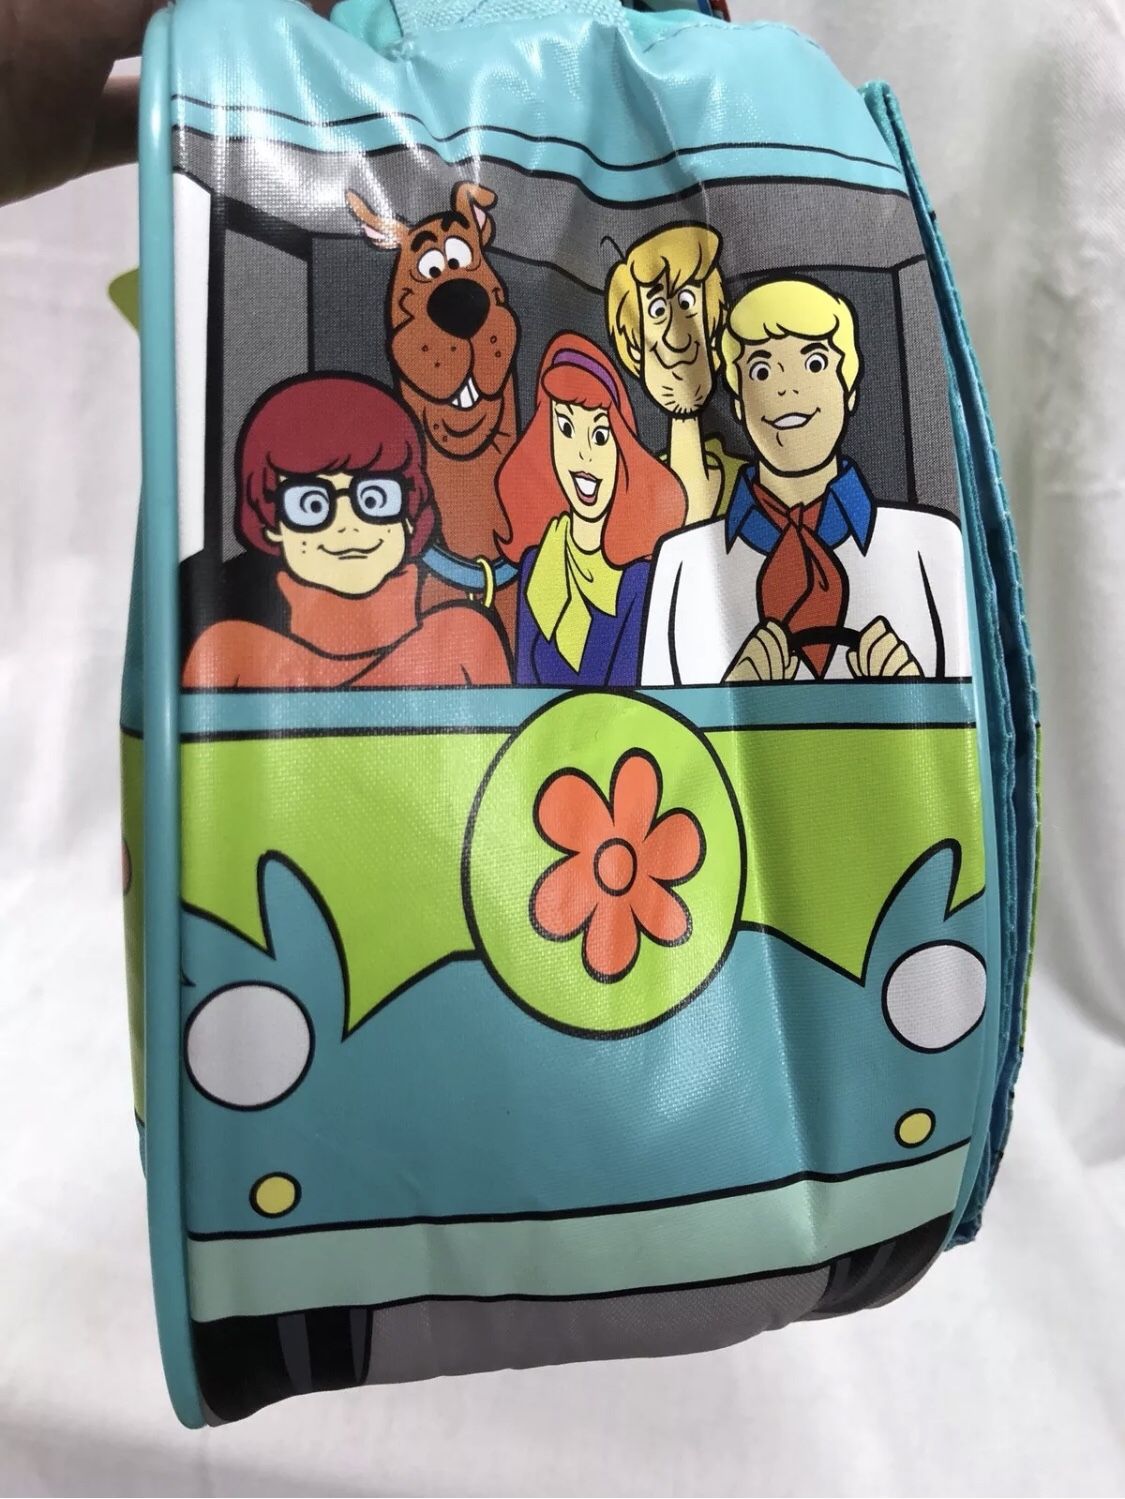 Lunch Boxes Photo: Scooby Doo Lunch Boxes  Lunch box, Vintage lunch boxes, Scooby  doo